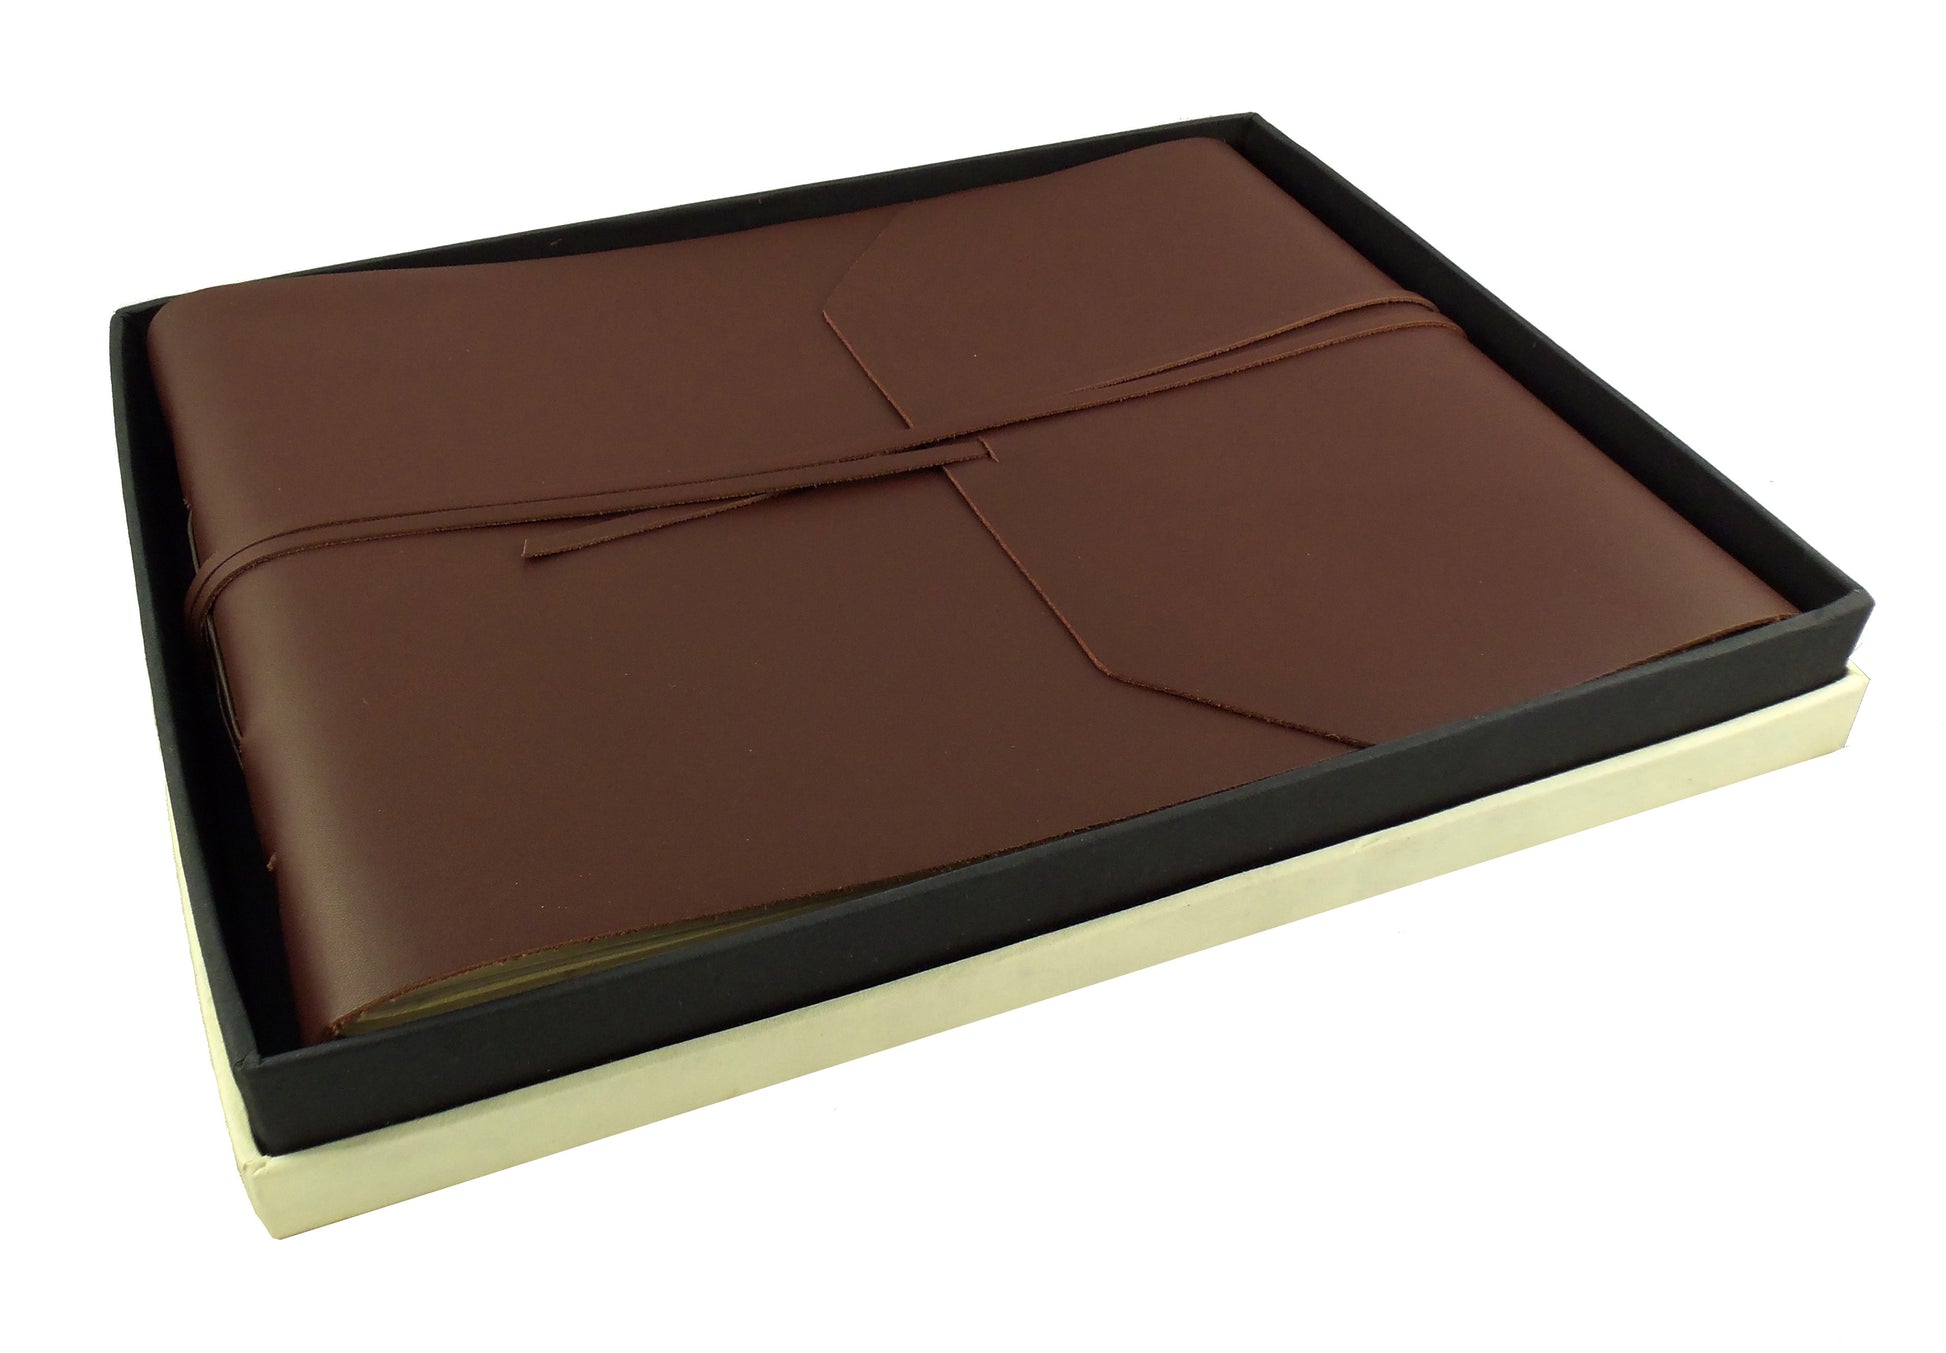 Large Genuine Leather Photo Album with Gift Box - Scrapbook Style Pages - Holds 400 4x6 or 200 5x7 Photos